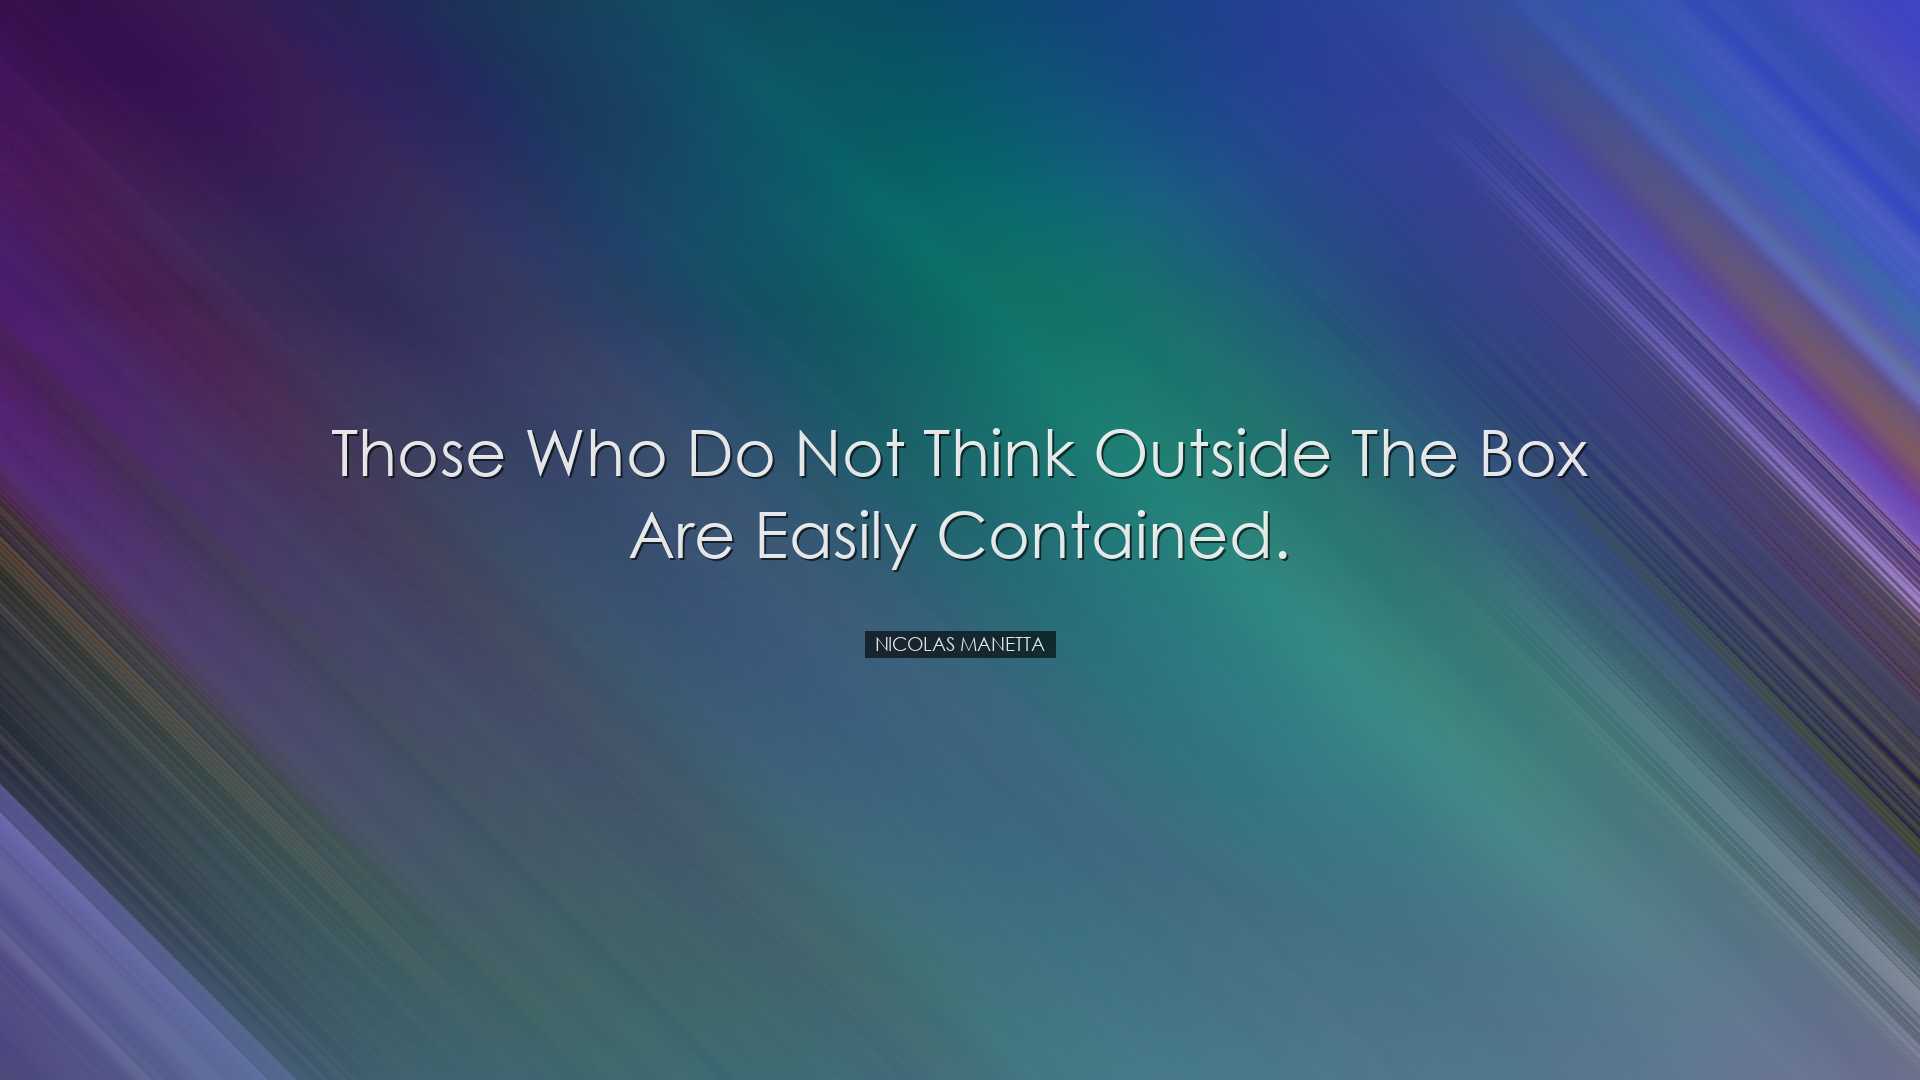 Those who do not think outside the box are easily contained. - Nic